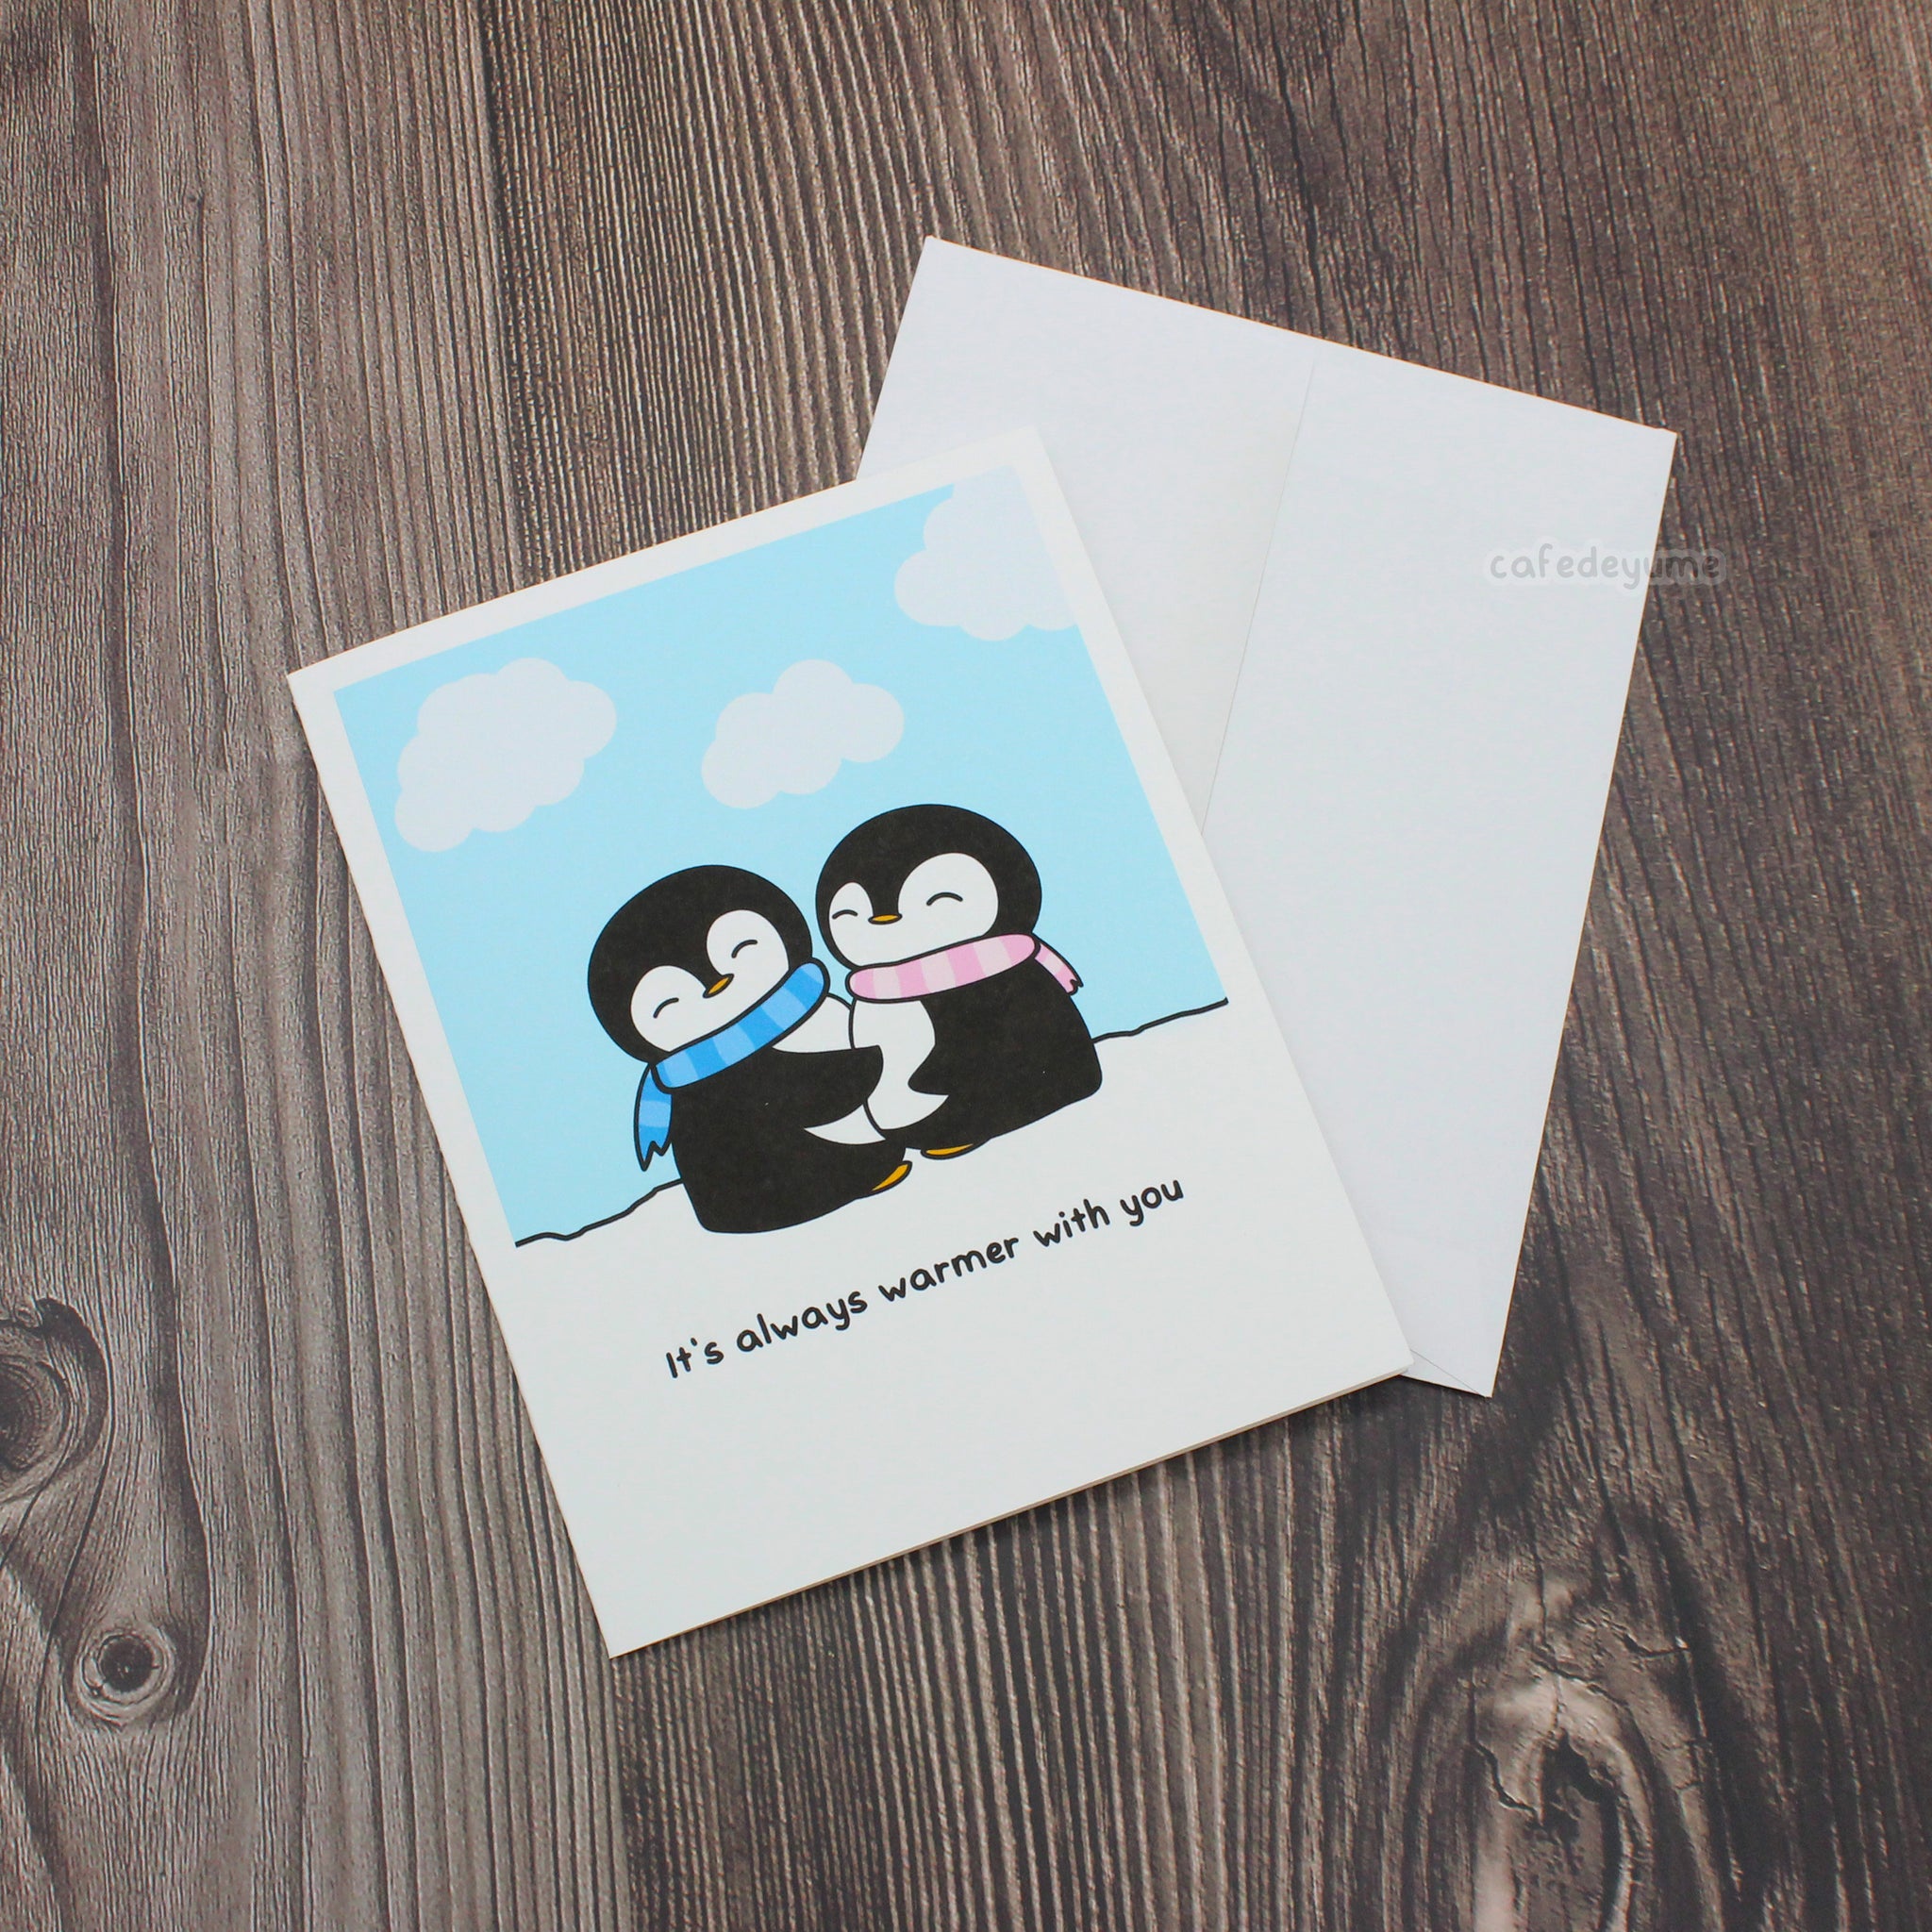 it's always warmer with you greeting card